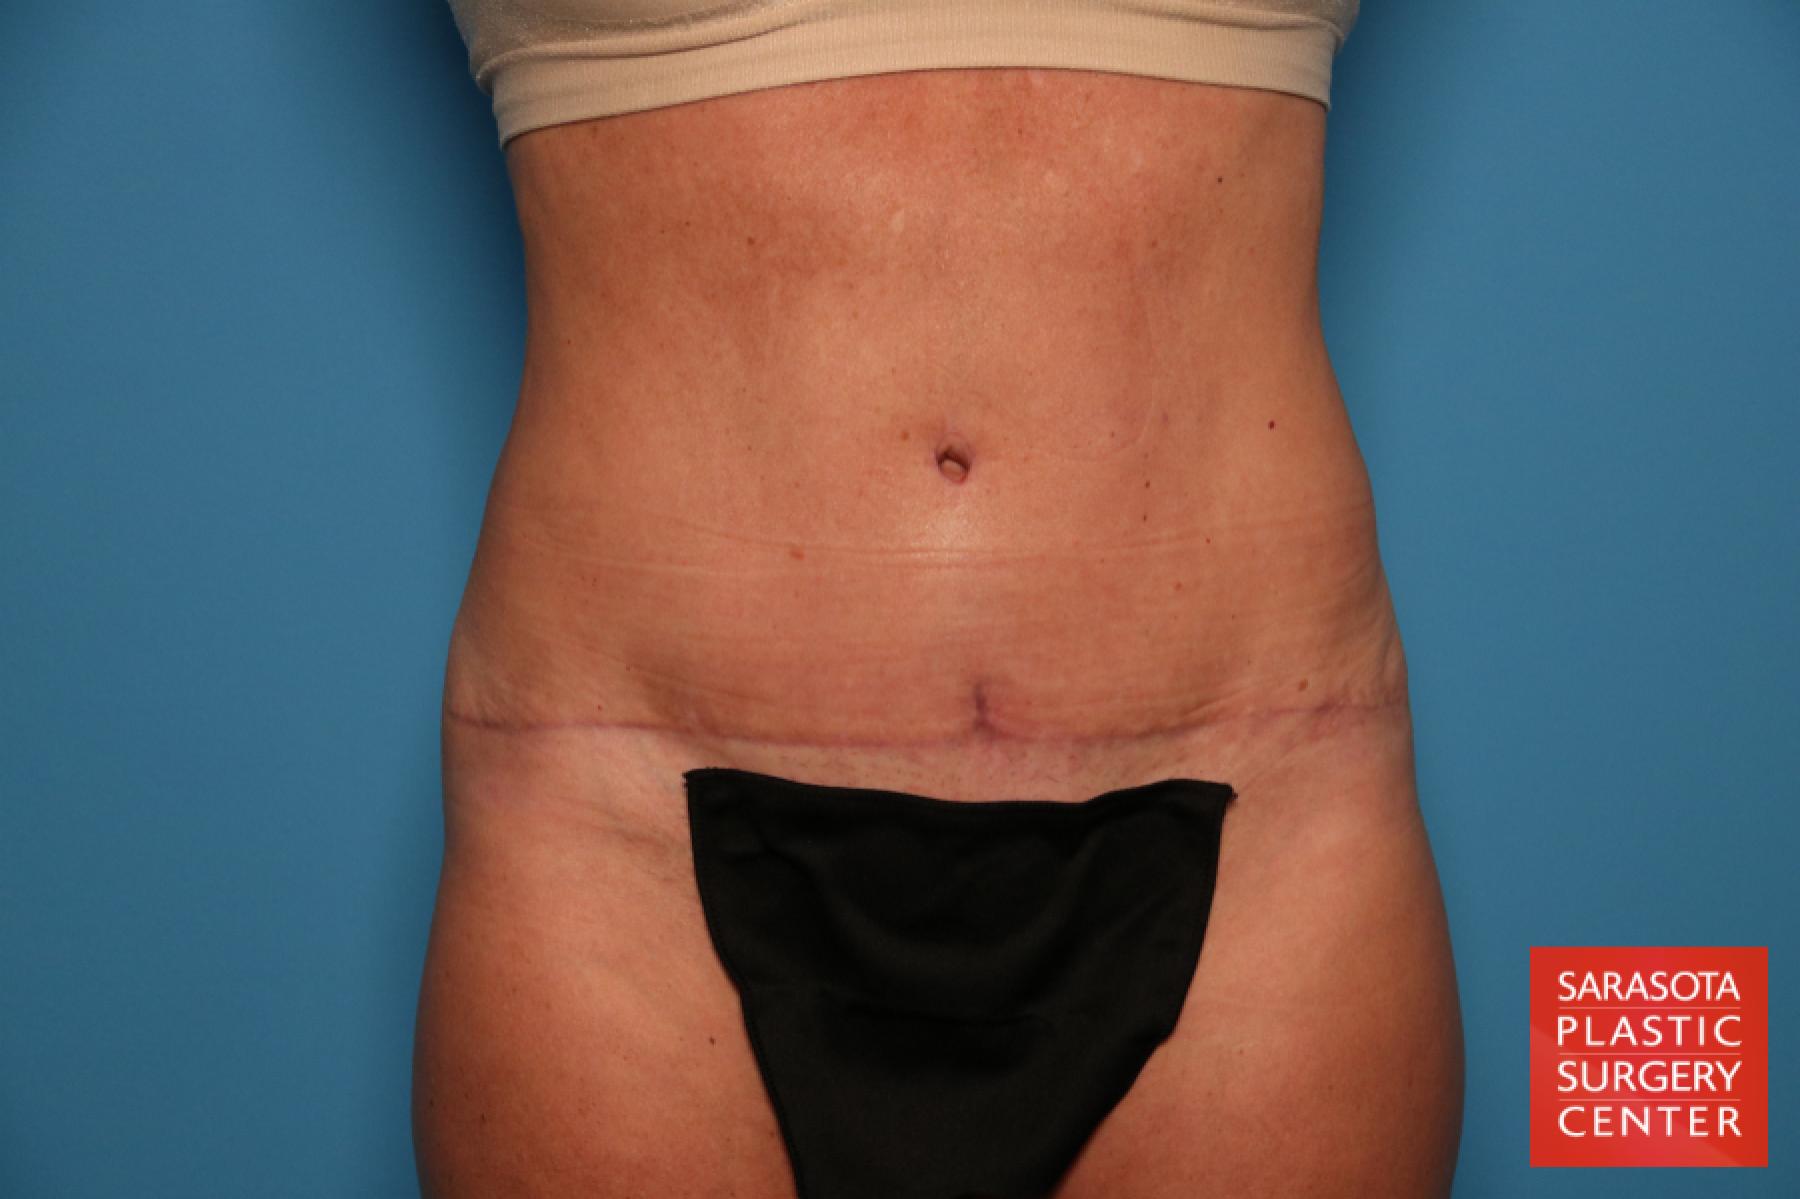 Tummy Tuck: Patient 10 - After 1